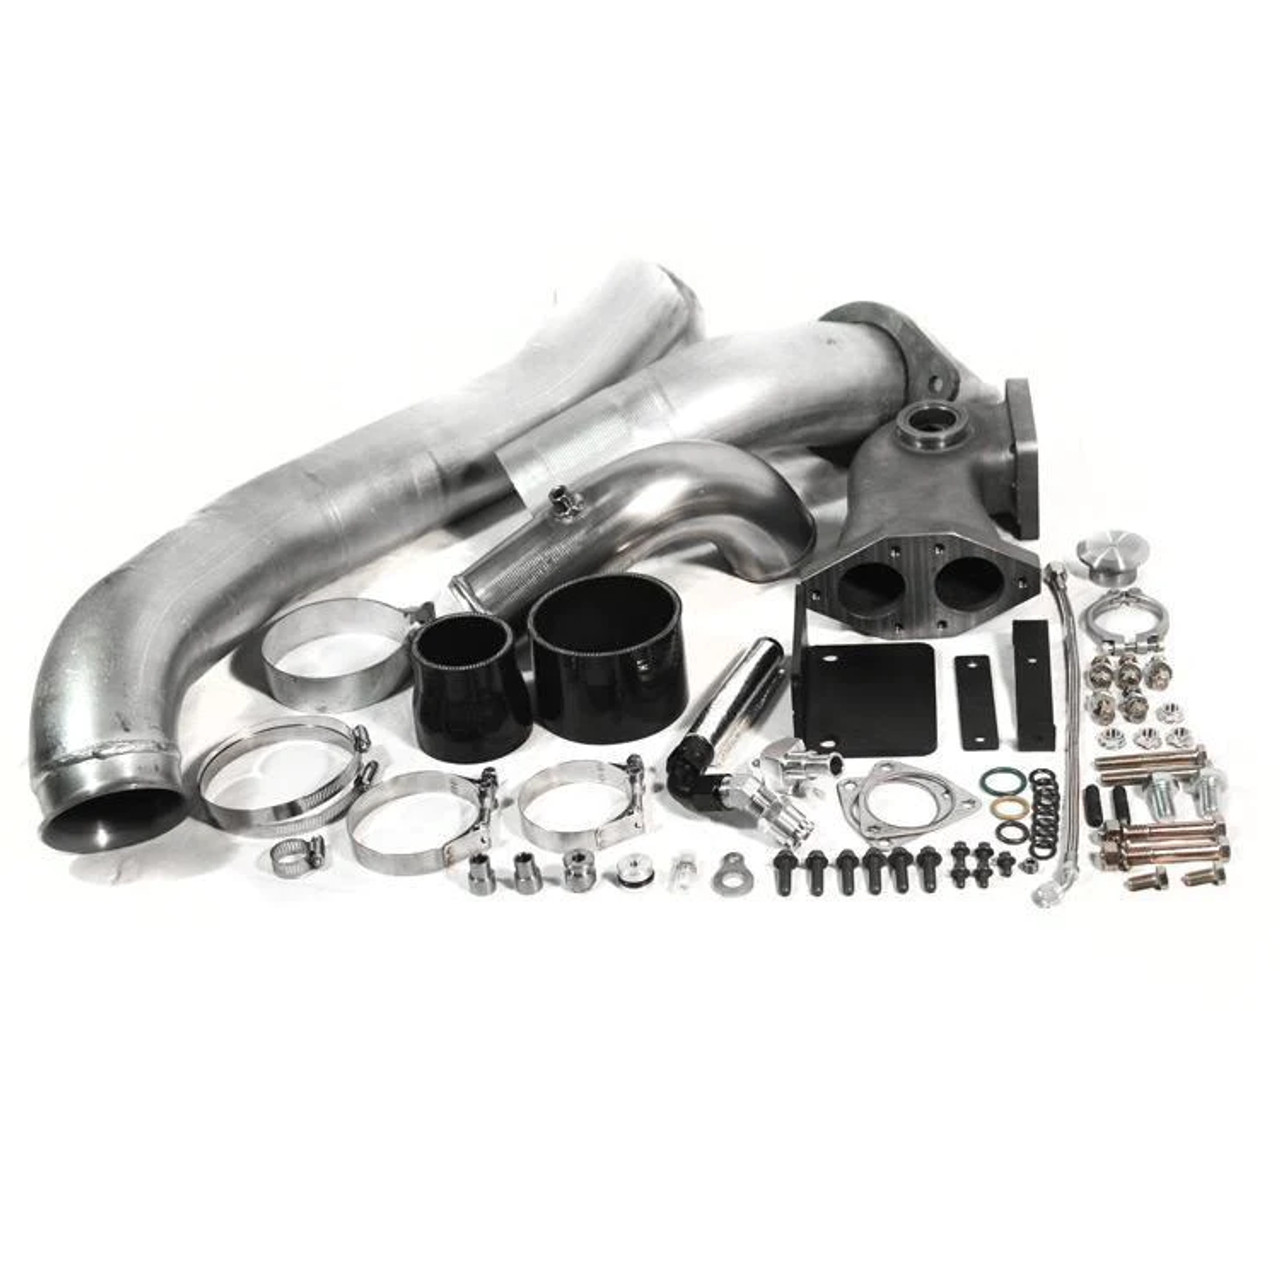  HSM Single Turbo Kit W/O Turbo (Divided) for 2008 to 2010 Ford 6.4L Powerstroke (342004-N) Main View